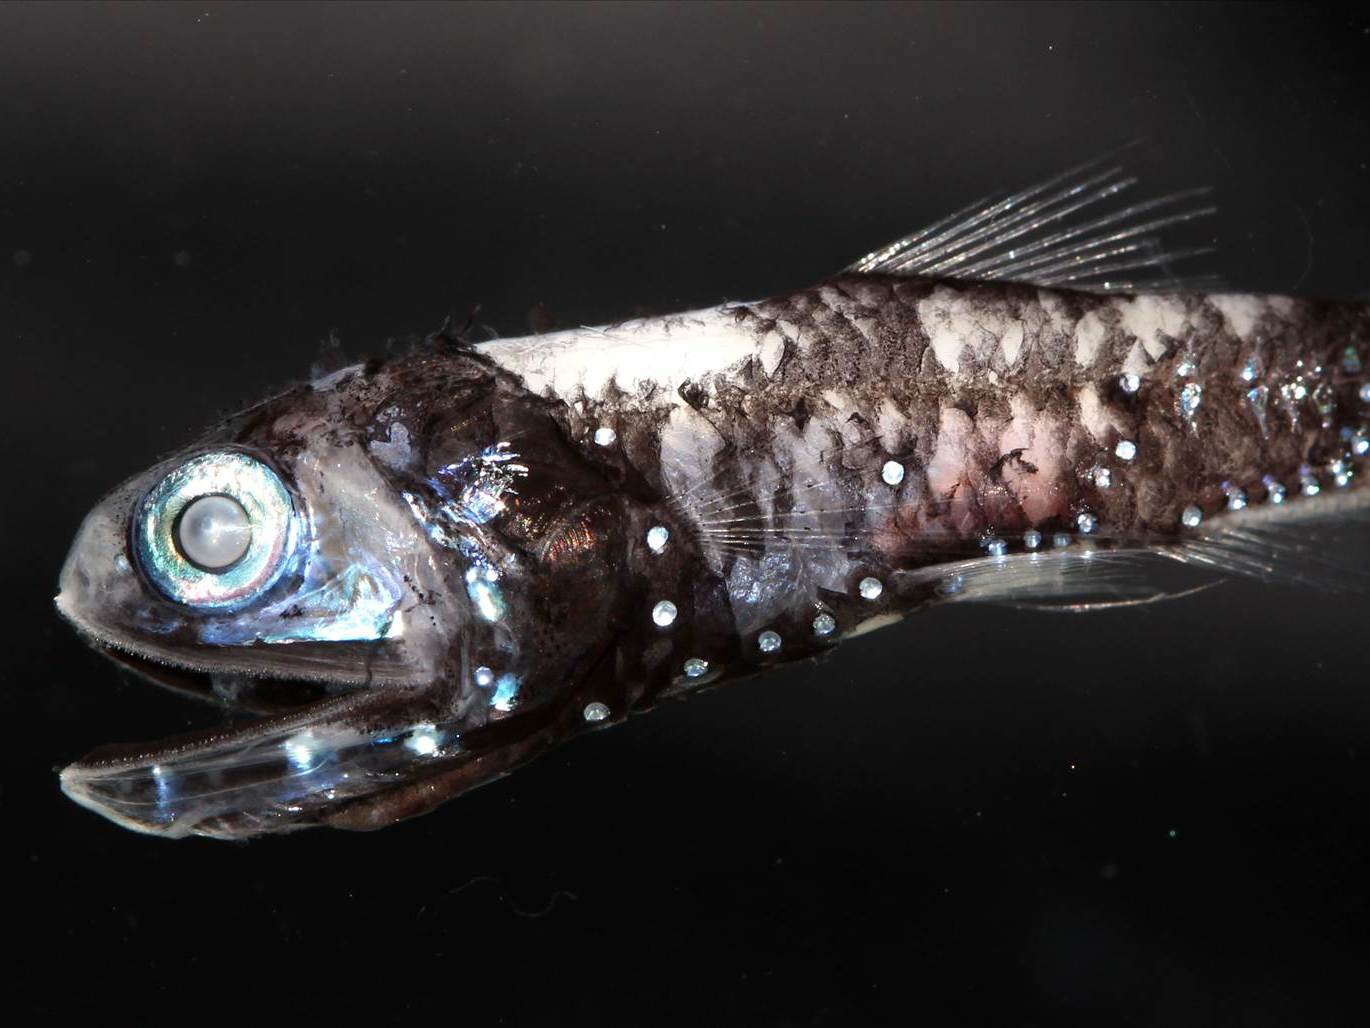 New type of highly sensitive colour vision discovered in deep-sea fish